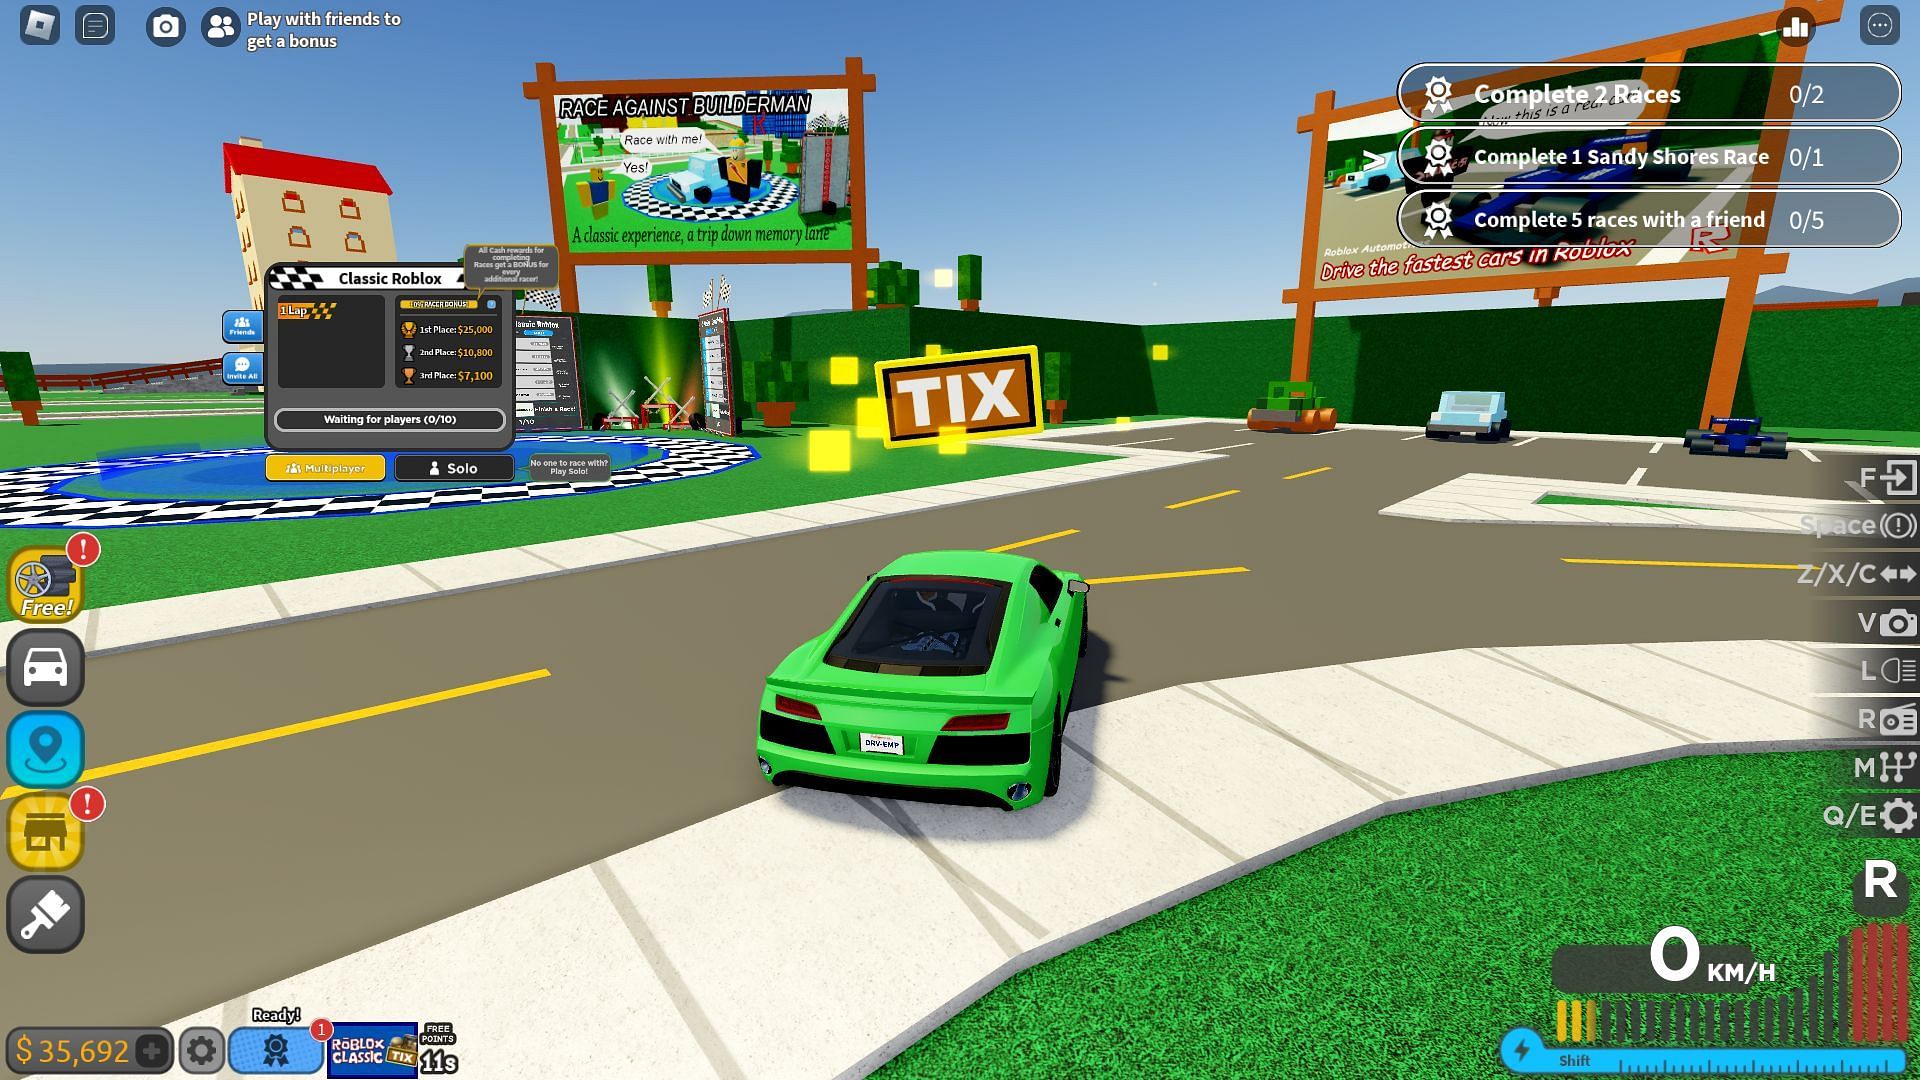 Tix can be found all over the map in the game (Image via Roblox || Sportskeeda)